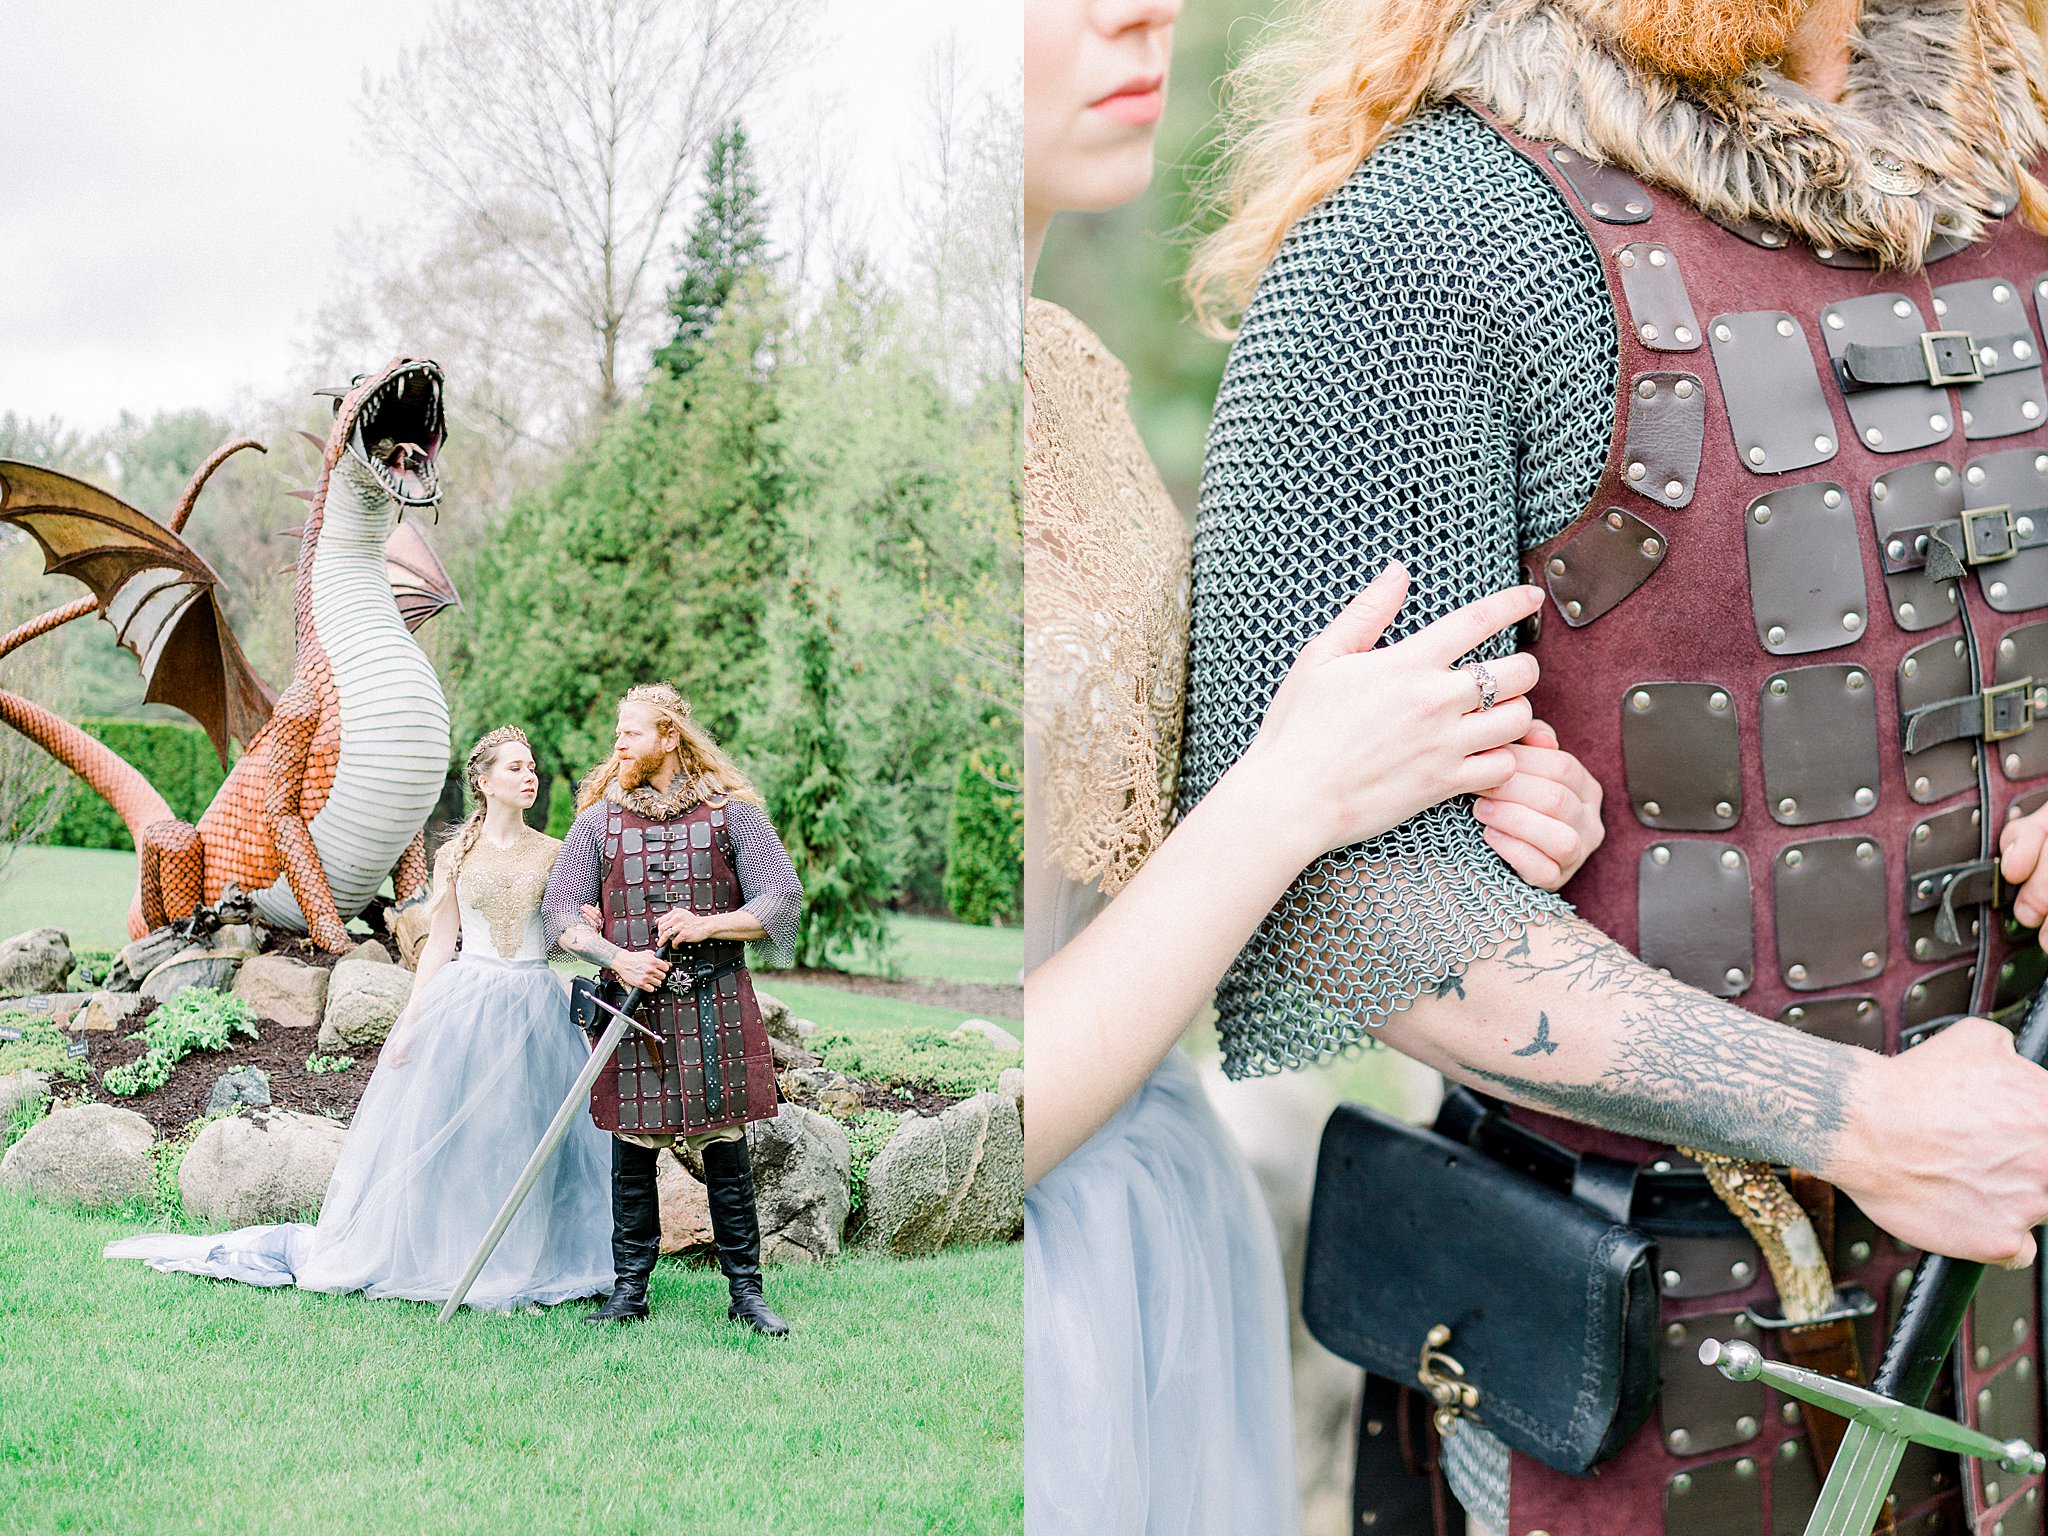 Game of Thrones wedding couple poses in front of dragon at Castle Farms in Charlevoix, Michigan.